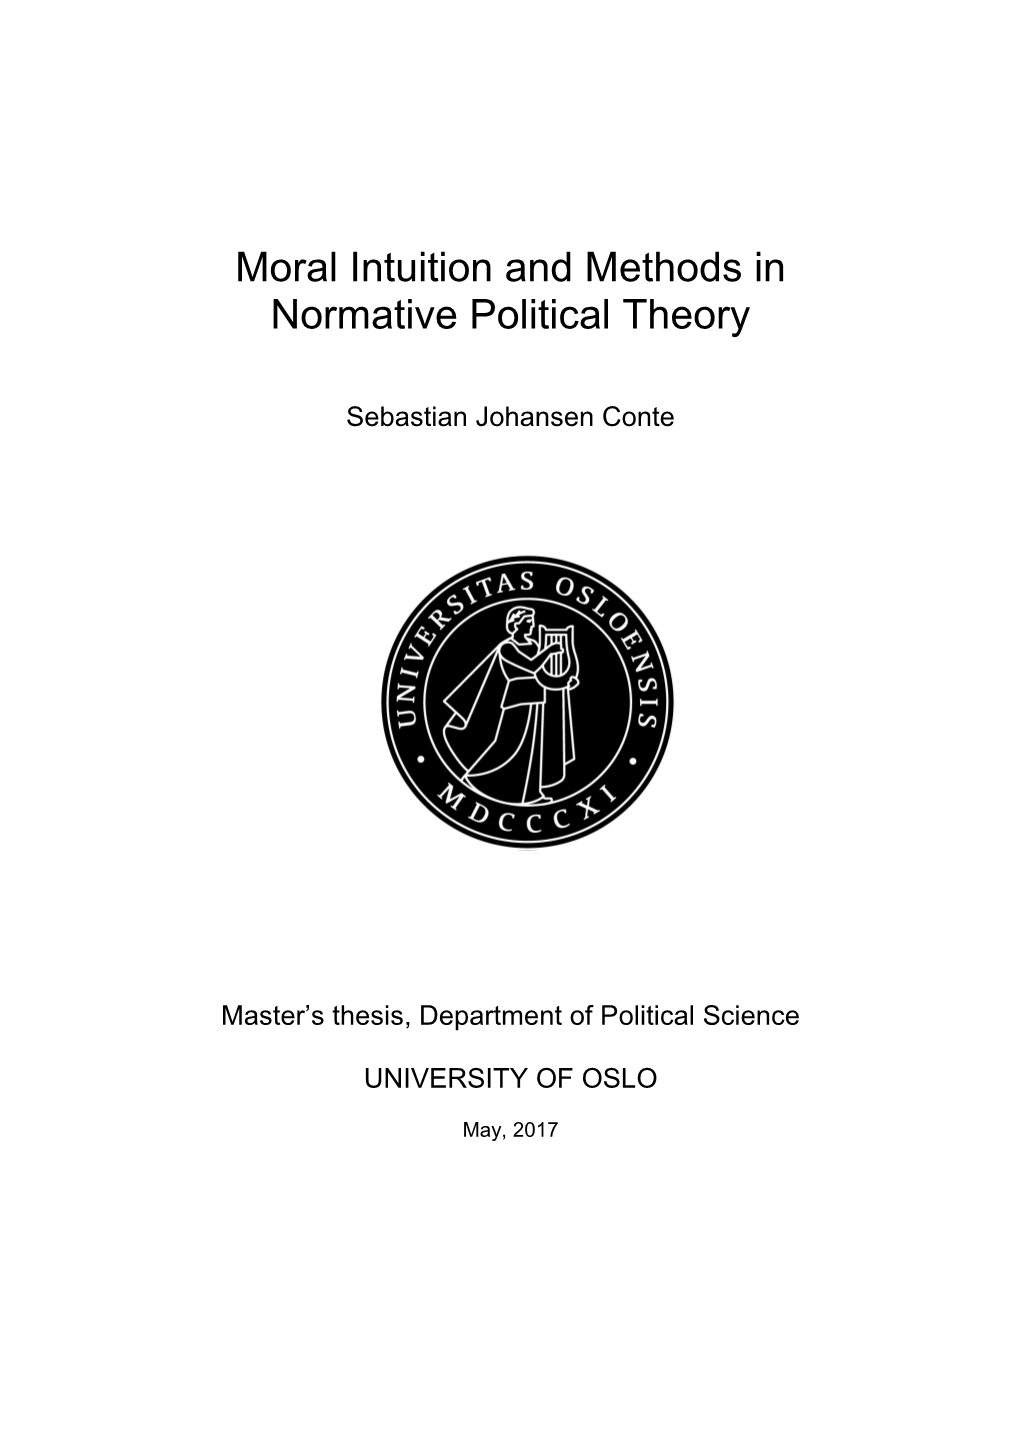 Moral Intuition and Methods in Normative Political Theory